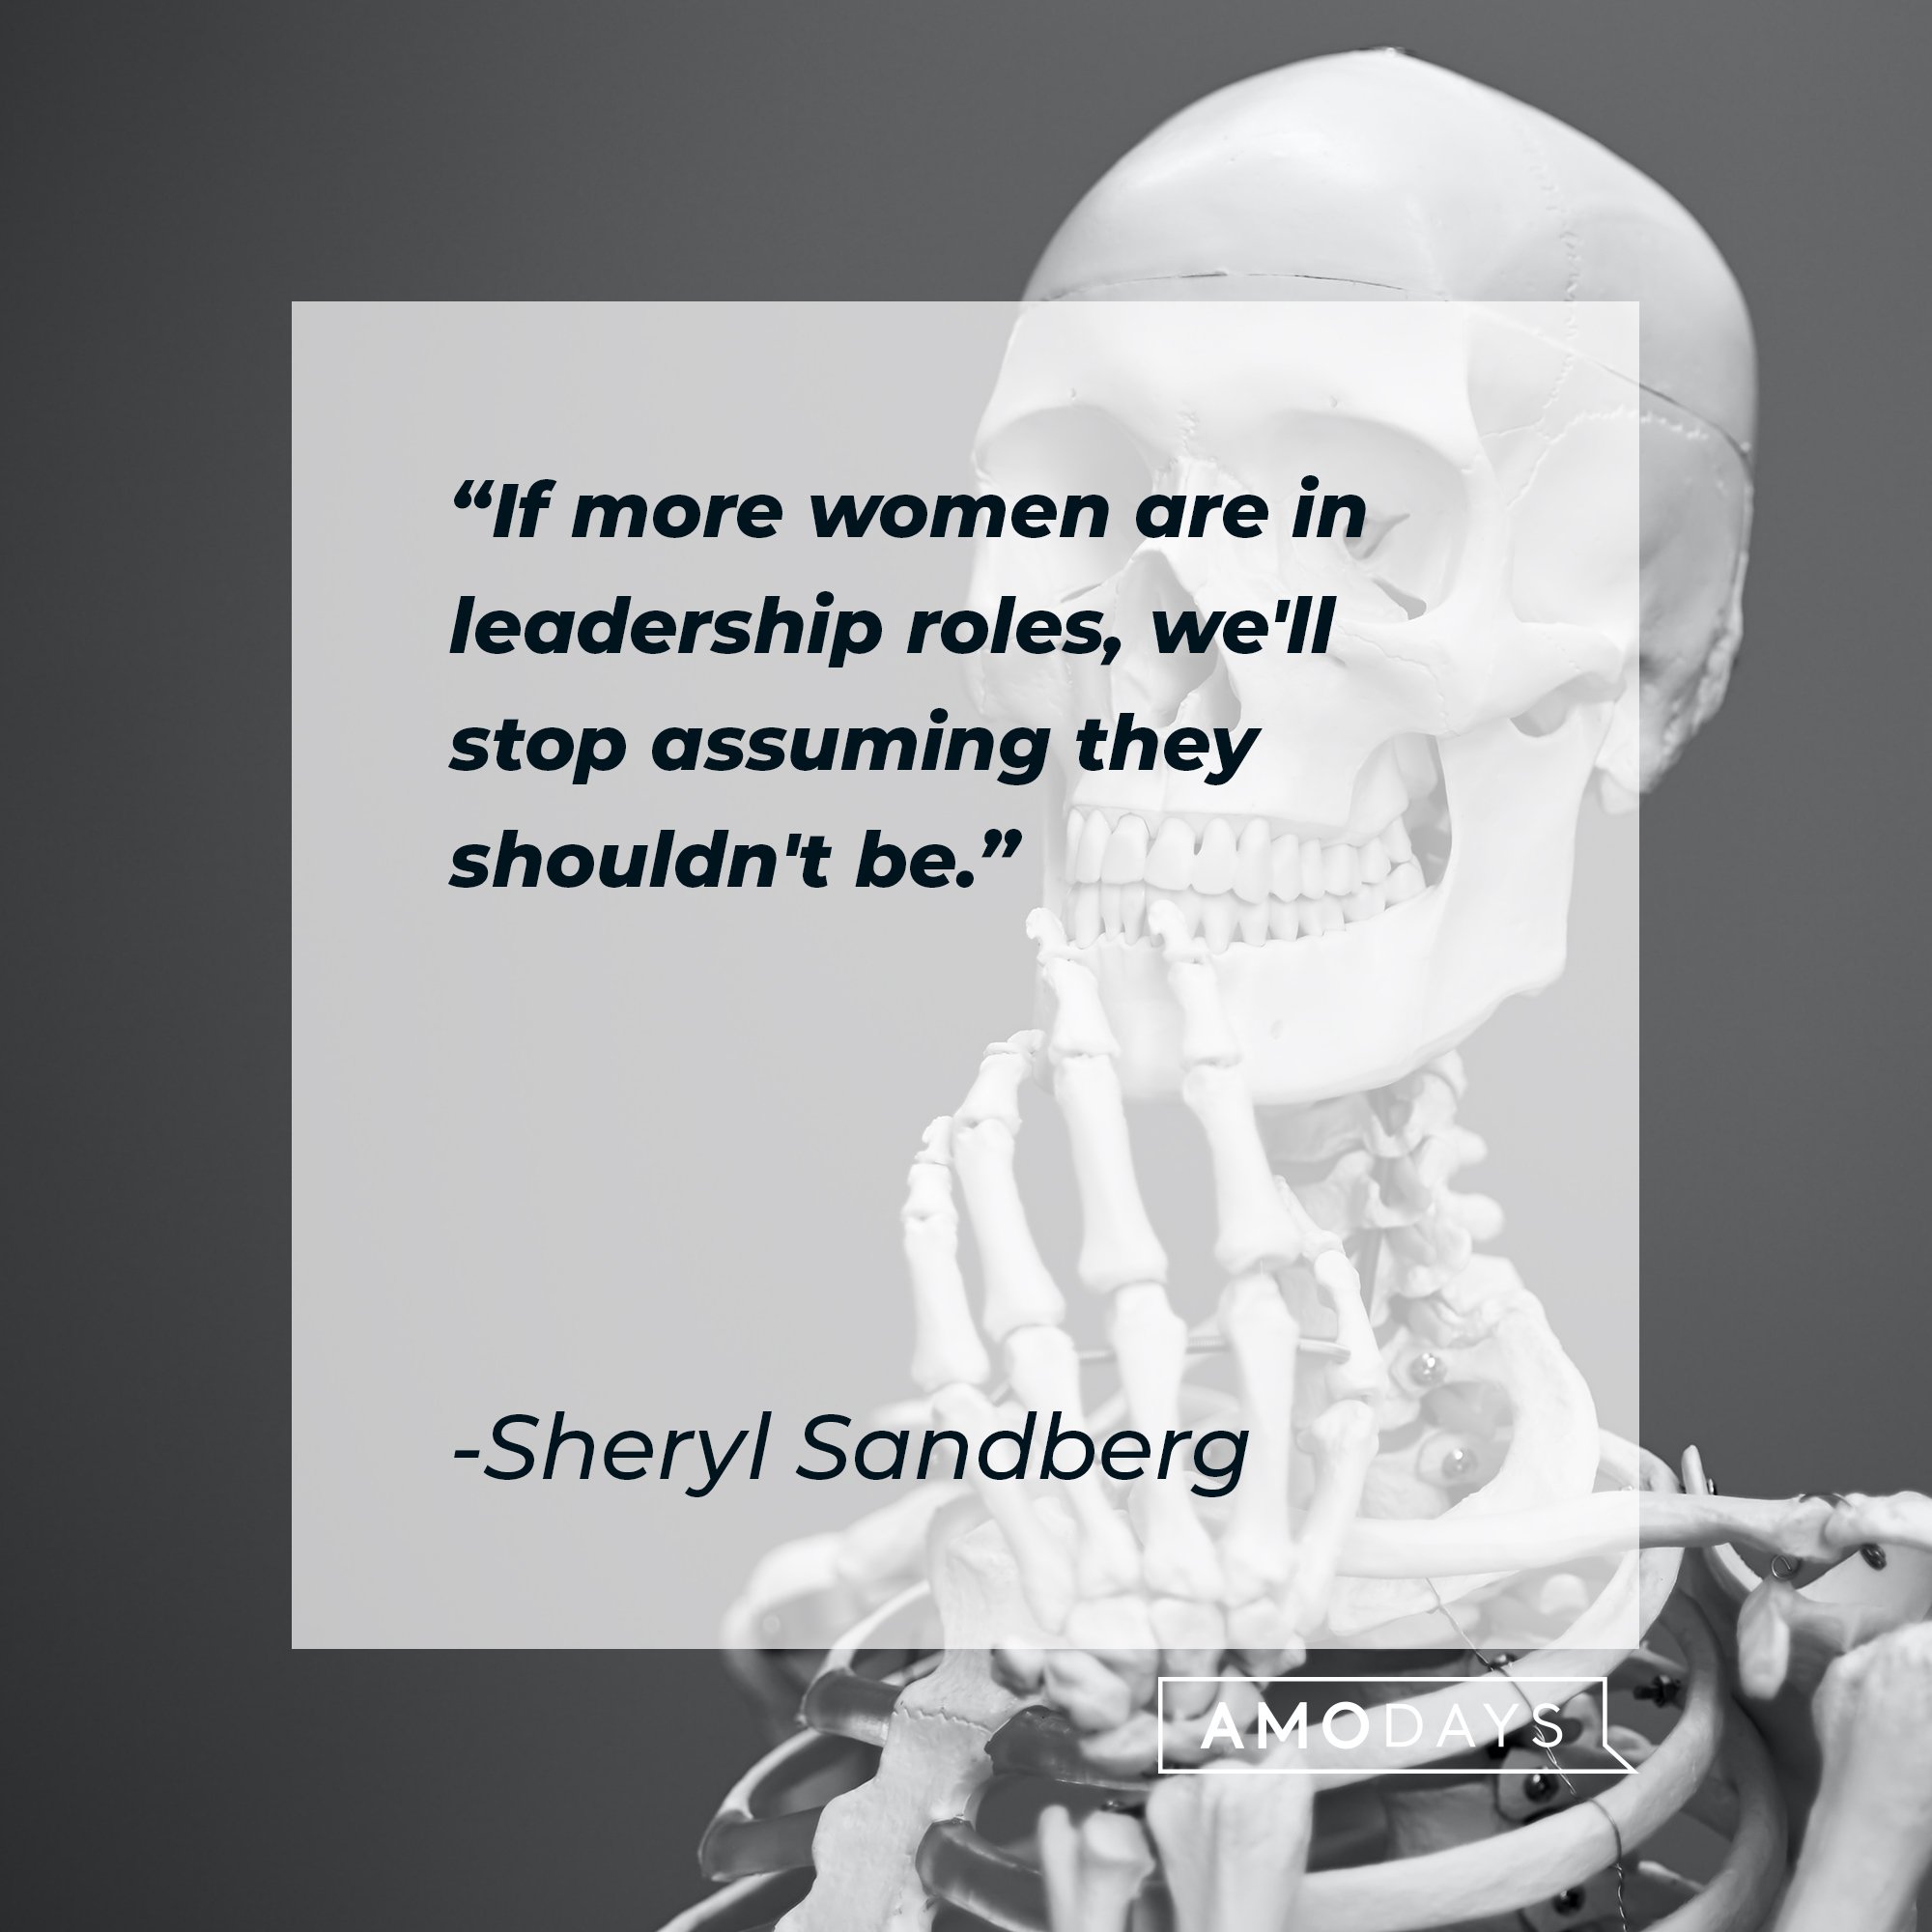 Sheryl Sandberg’s quote: "If more women are in leadership roles, we'll stop assuming they shouldn't be." | Image: AmoDays 